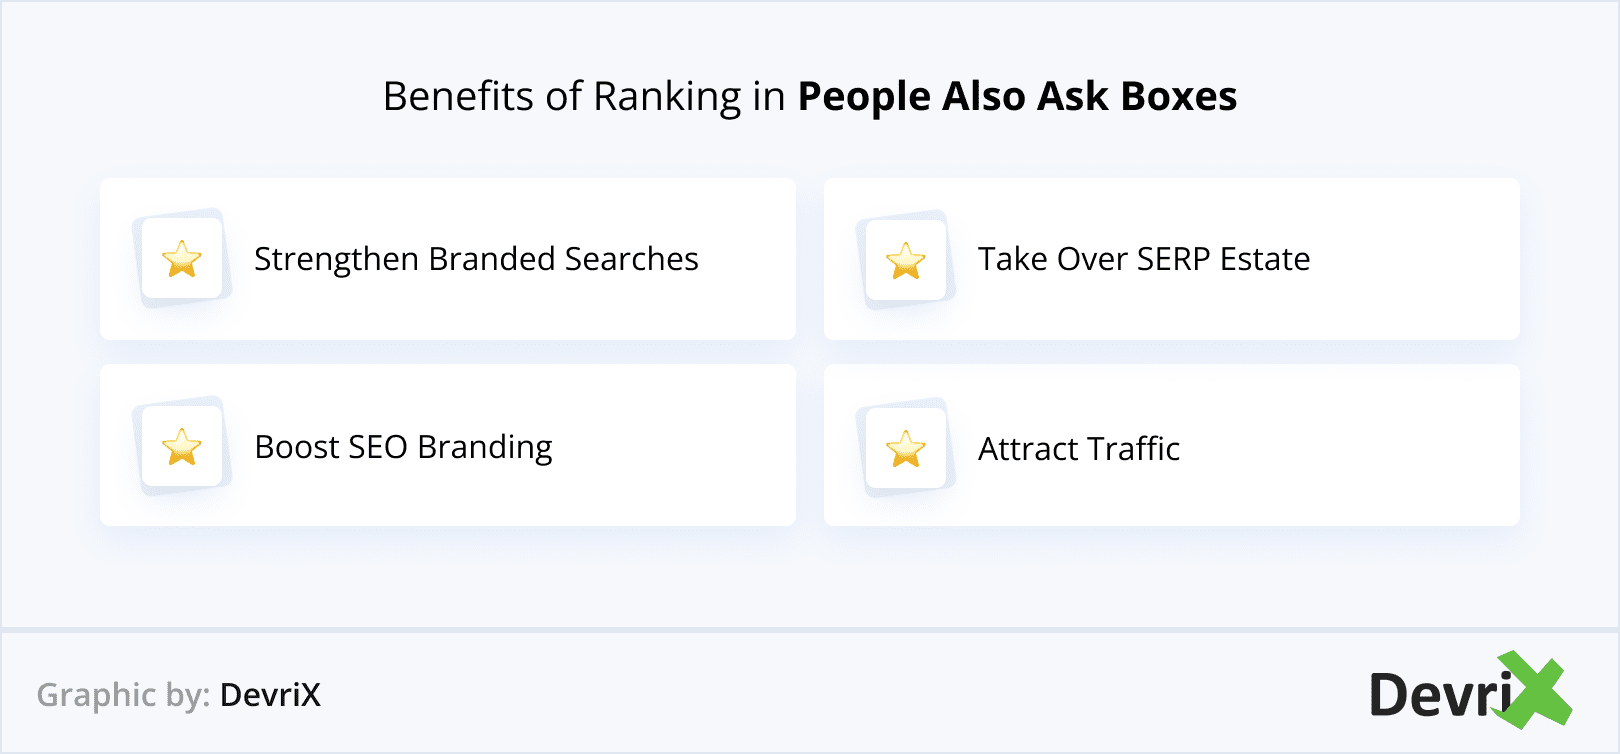 Benefits of Ranking in People Also Ask Boxes